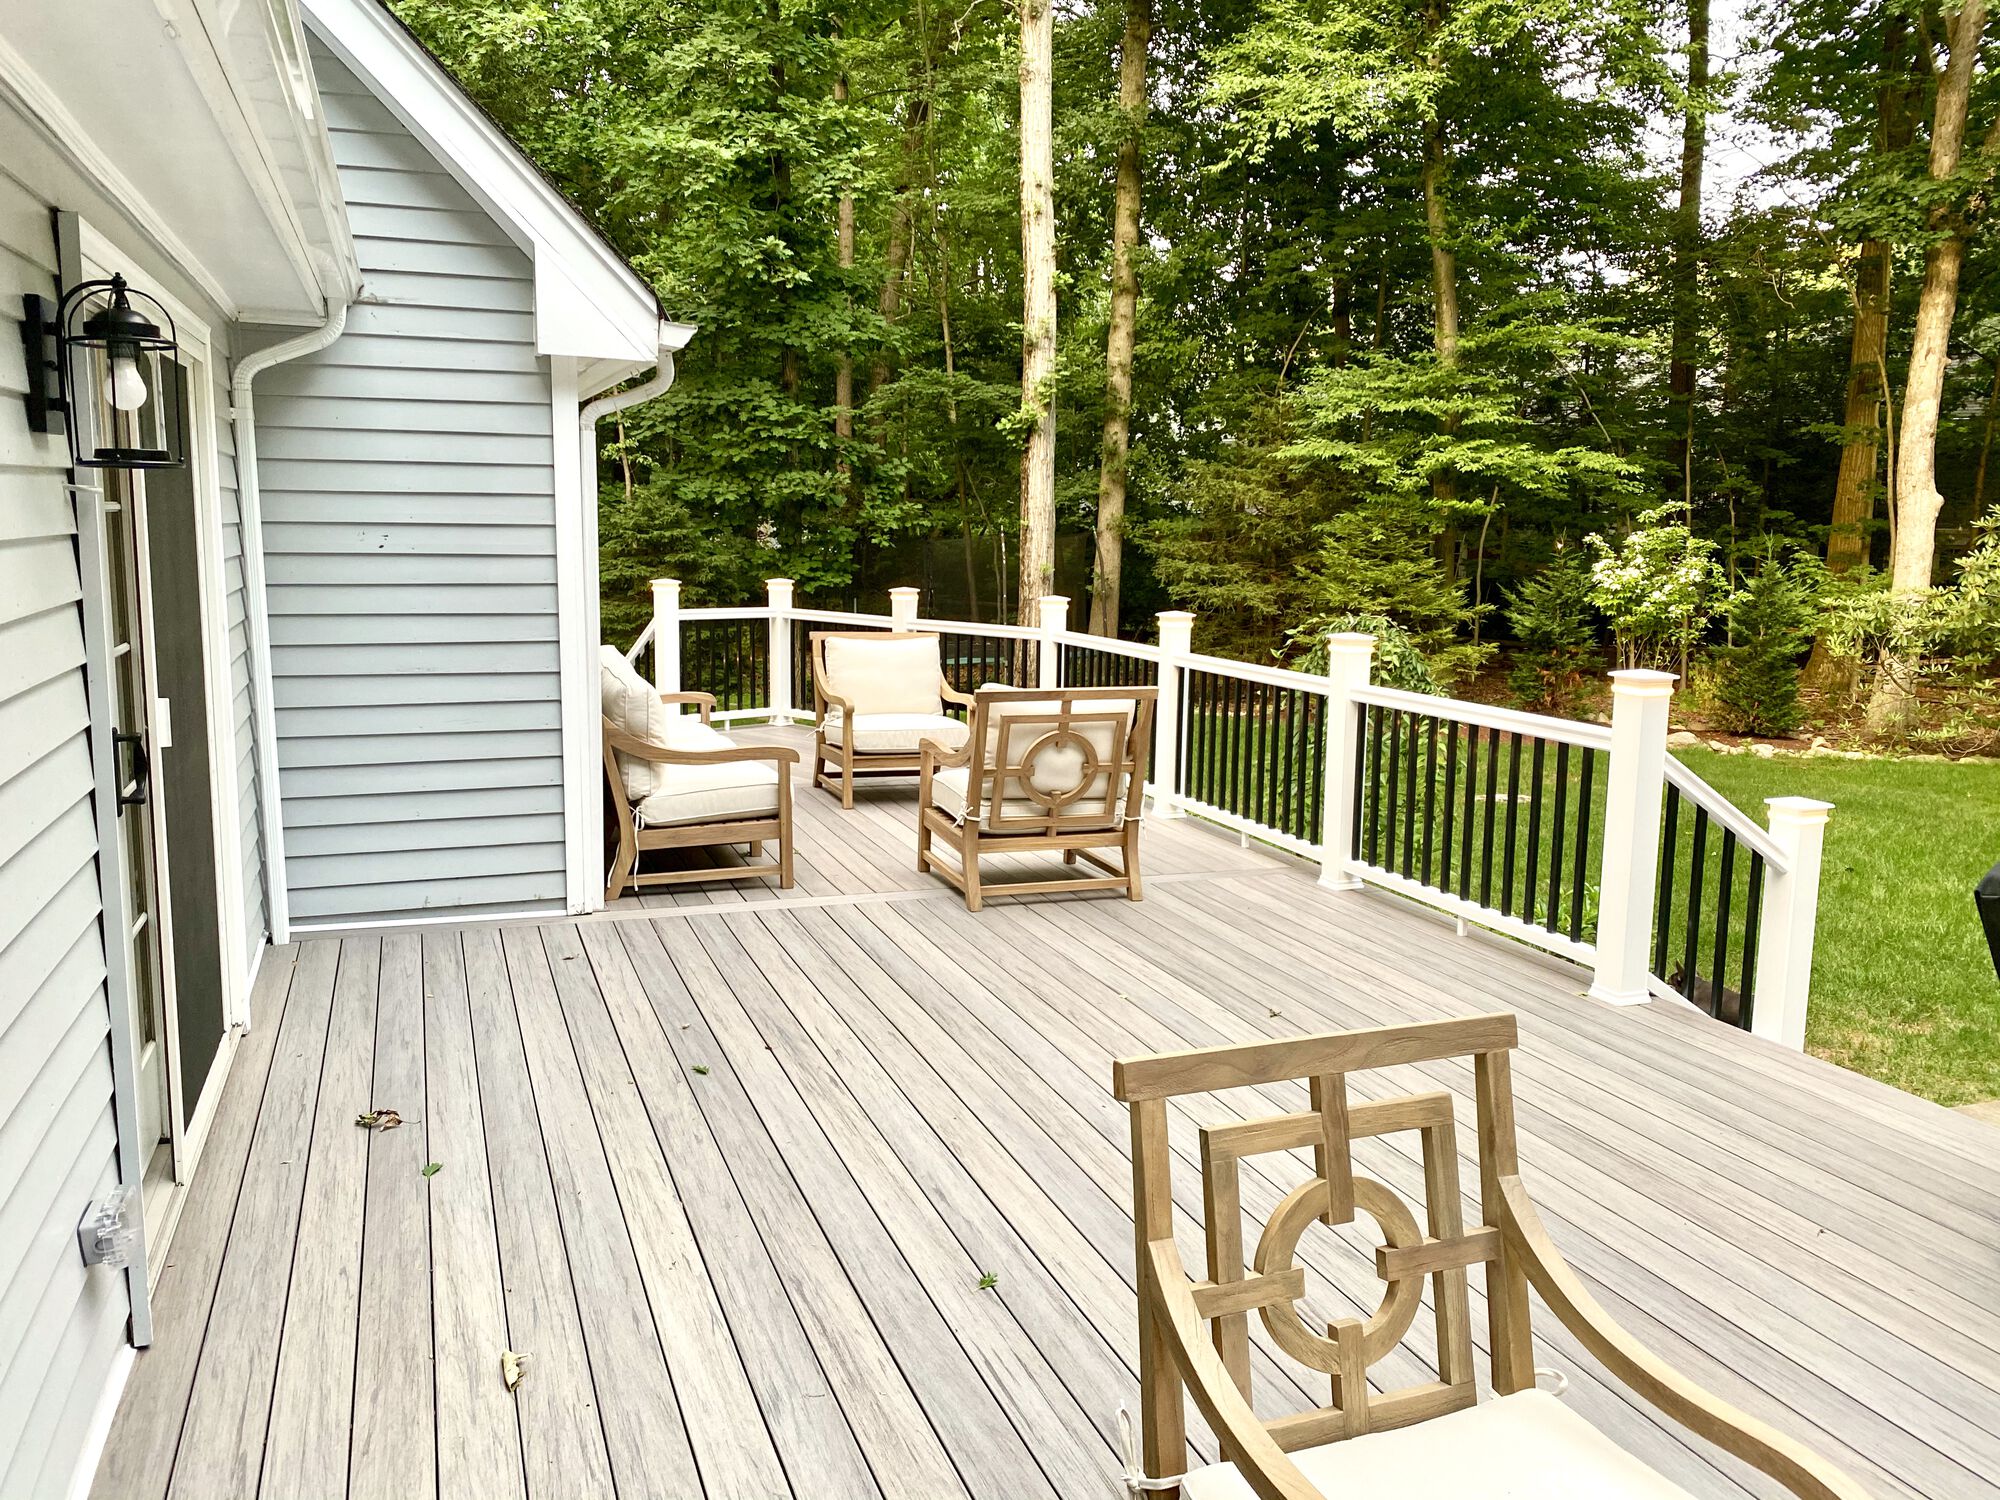 Deck Remodeling with Timbertech Capped Composite in Franklin lakes, Bergen County NJ